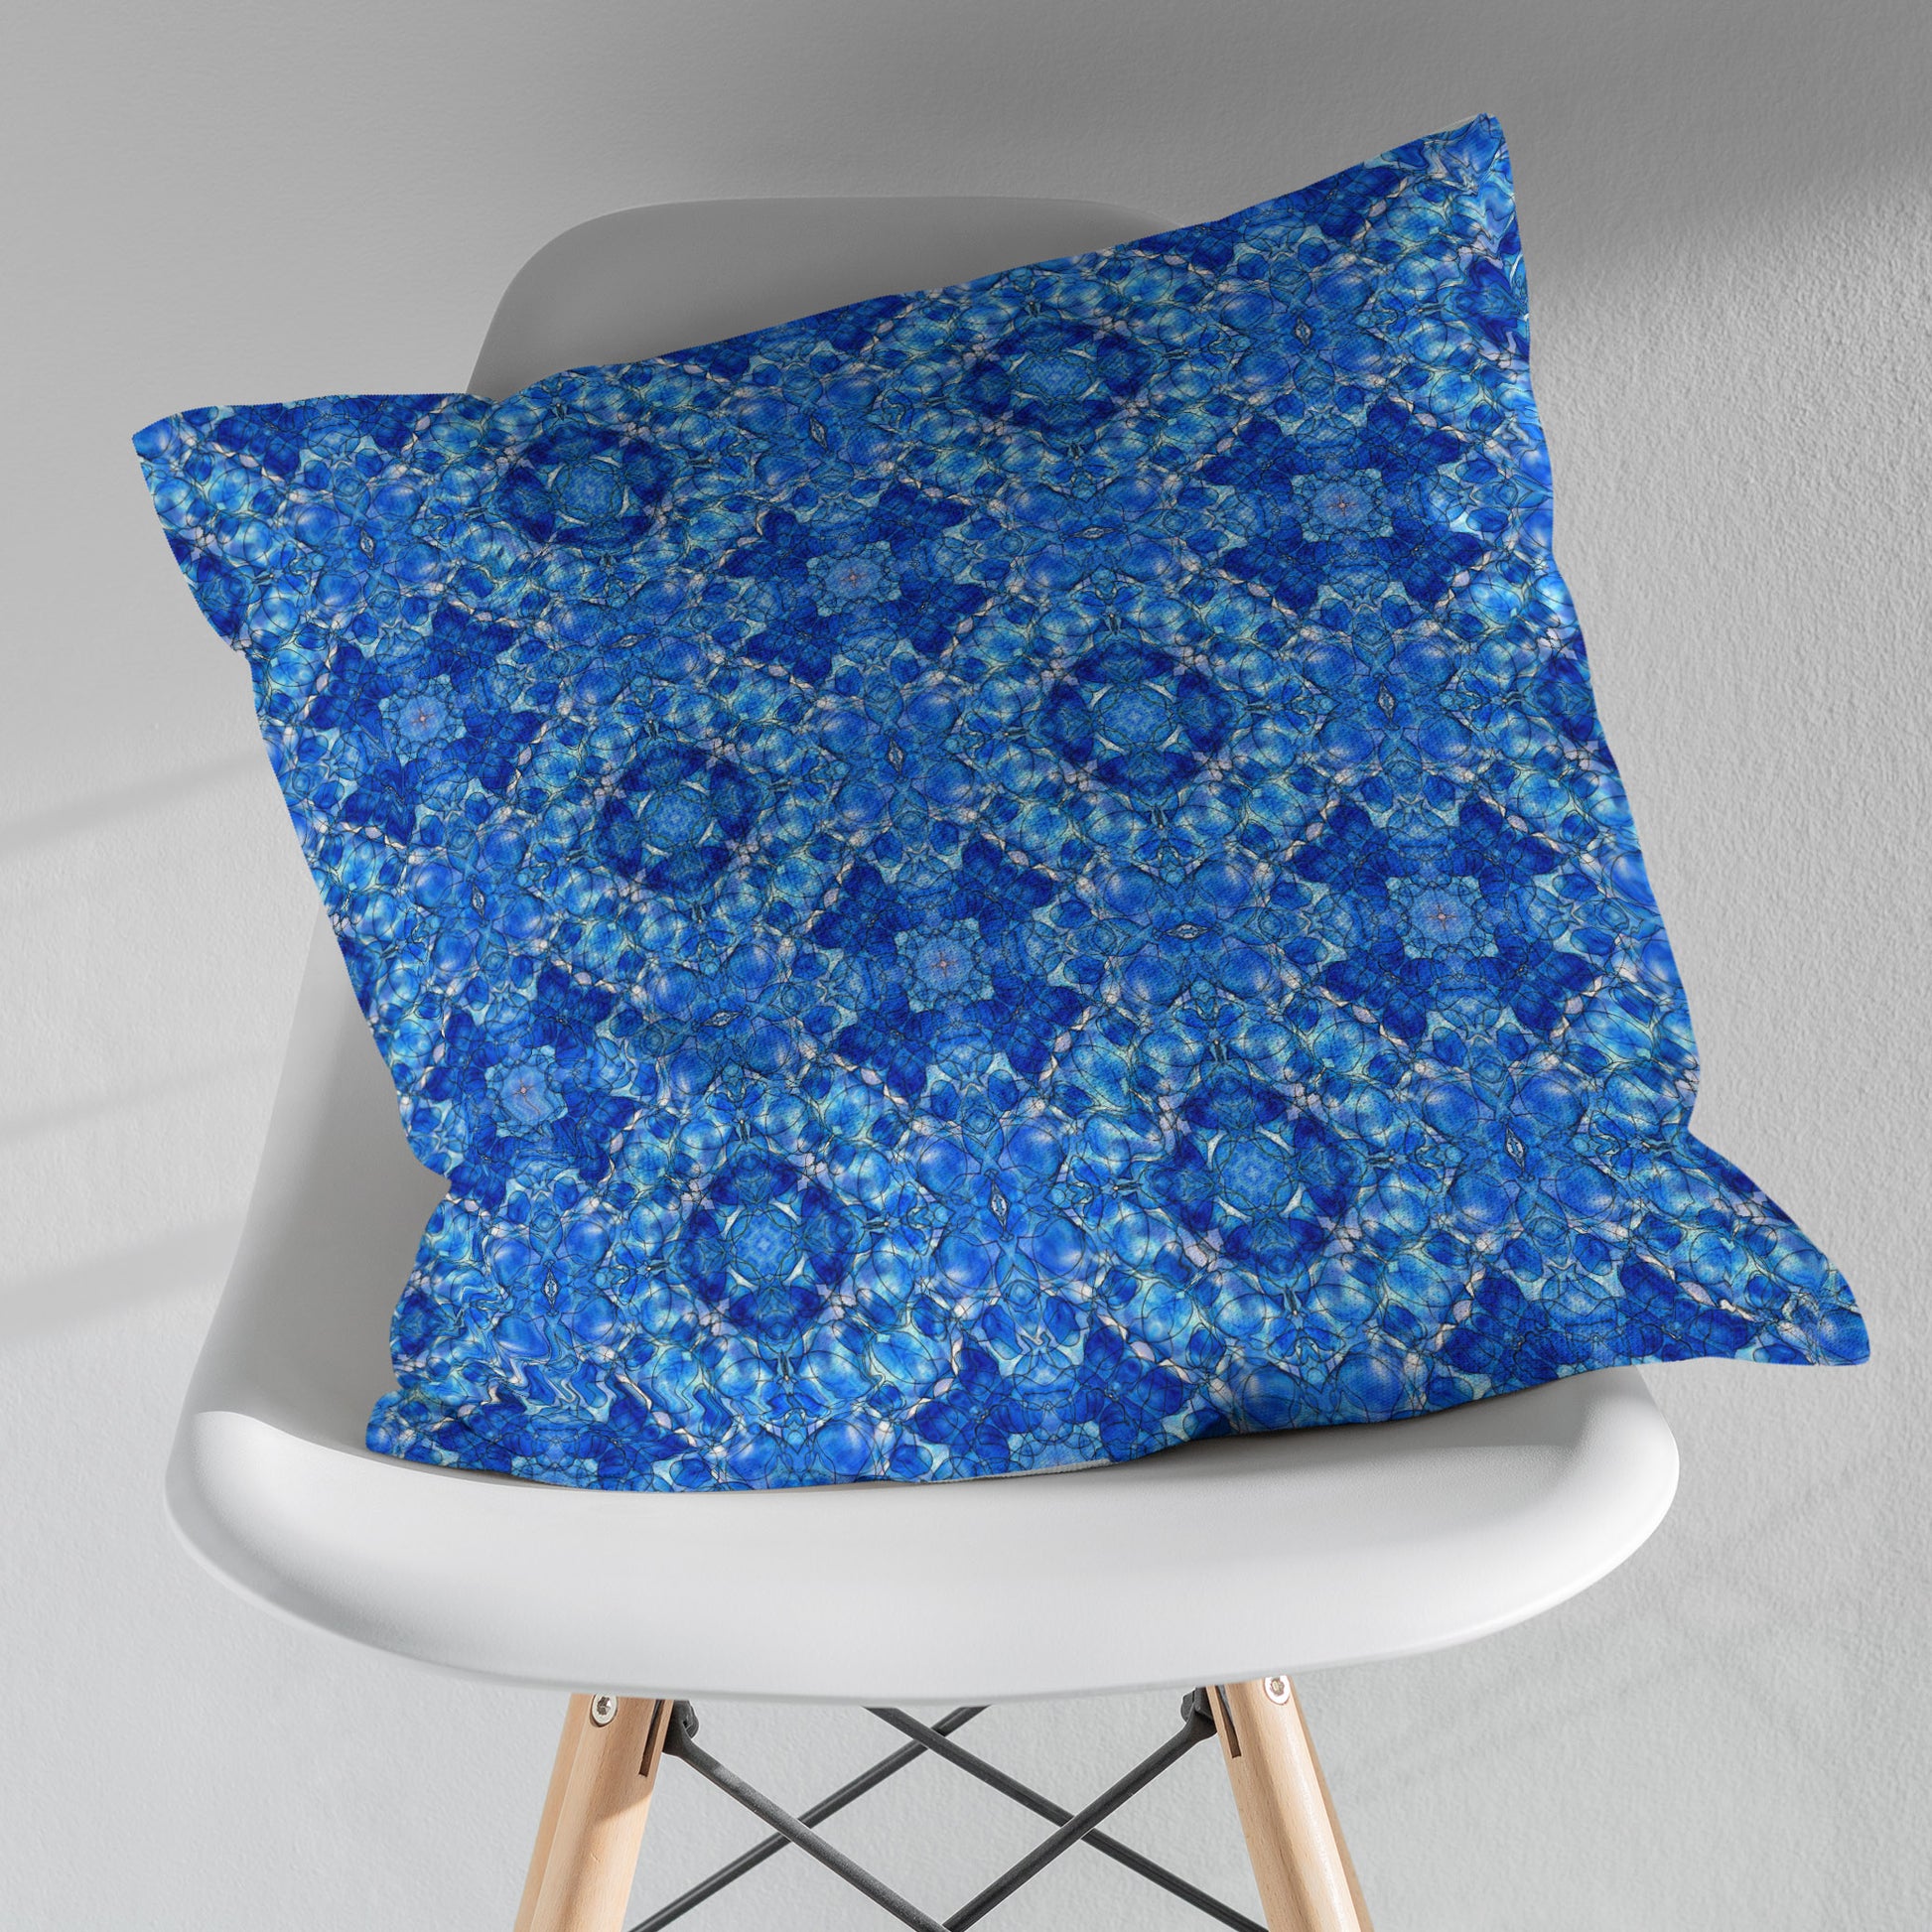 Square throw pillow featuring a hand-painted pattern mosaic pattern in cobalt blue, sitting on a white modernist chair